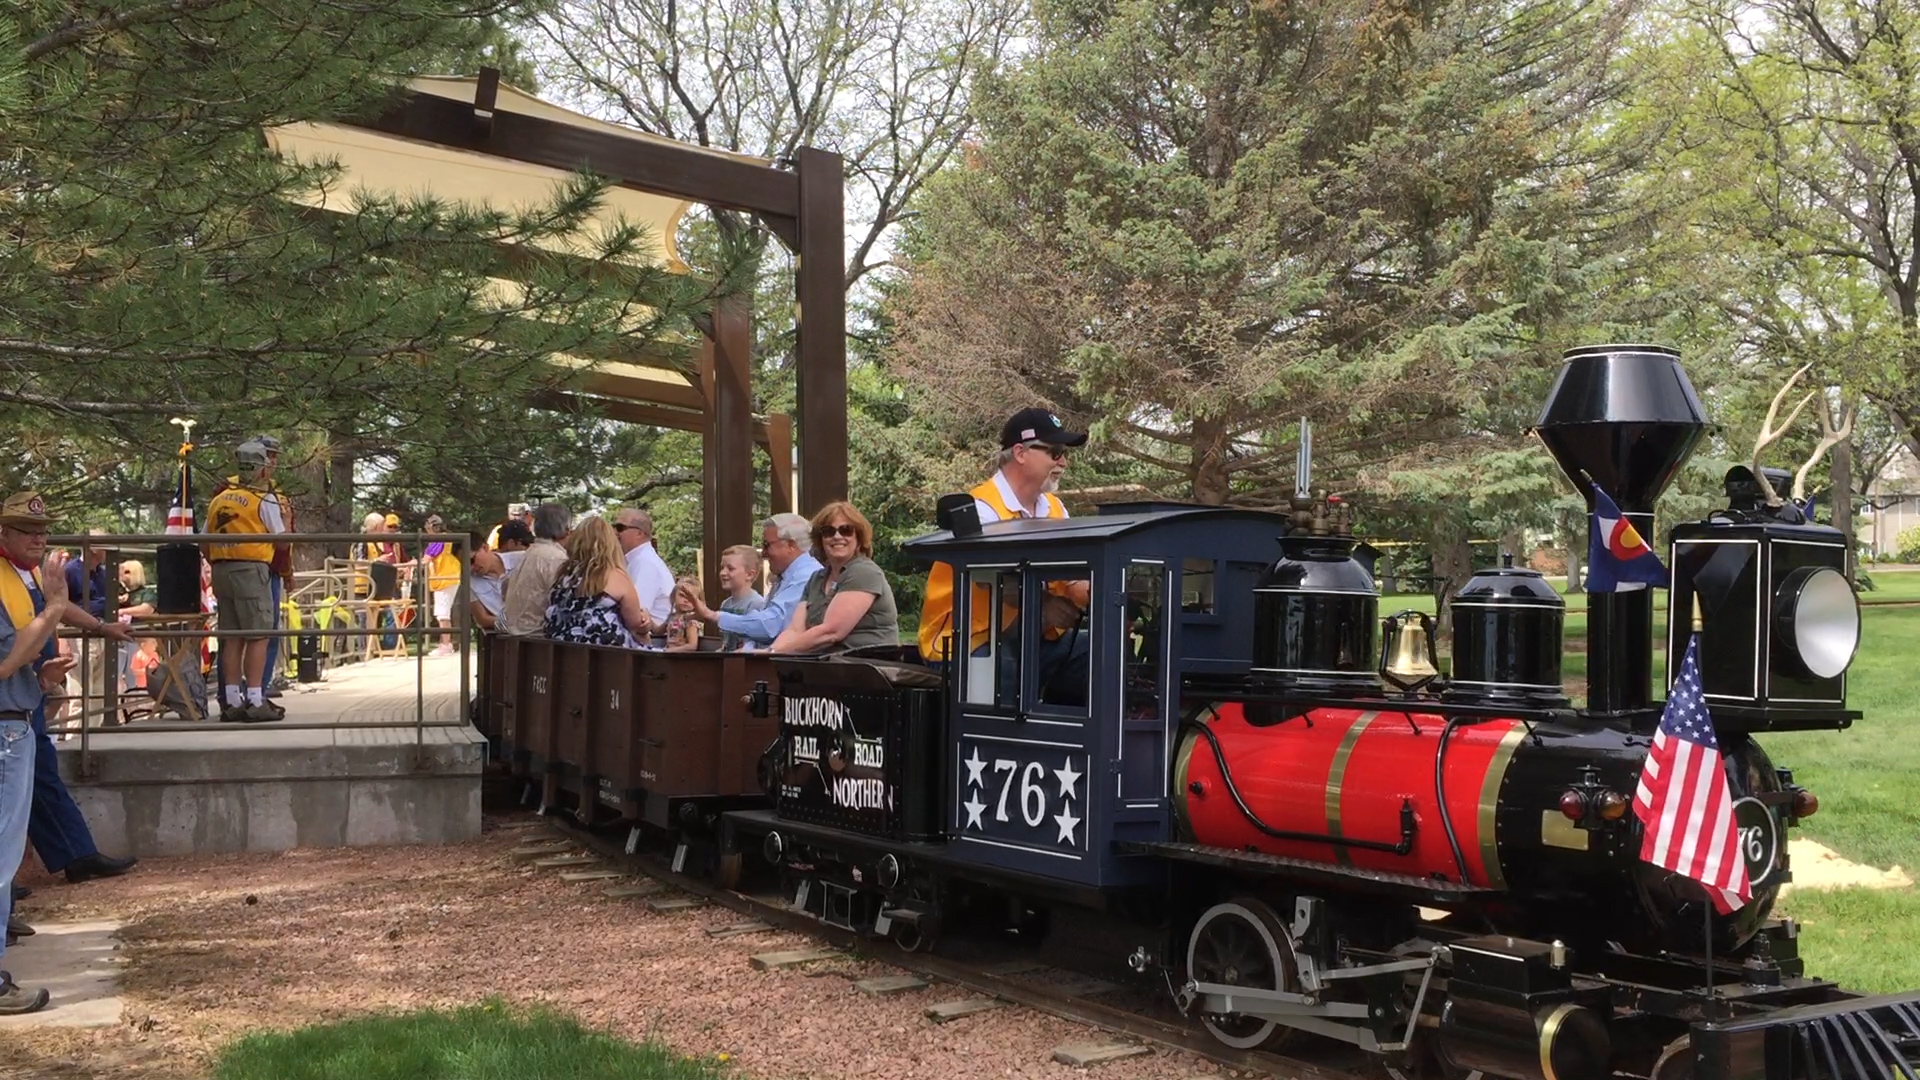 The Buckhorn Northern Railway train sits at the platform in North Lake Park while passengers load.